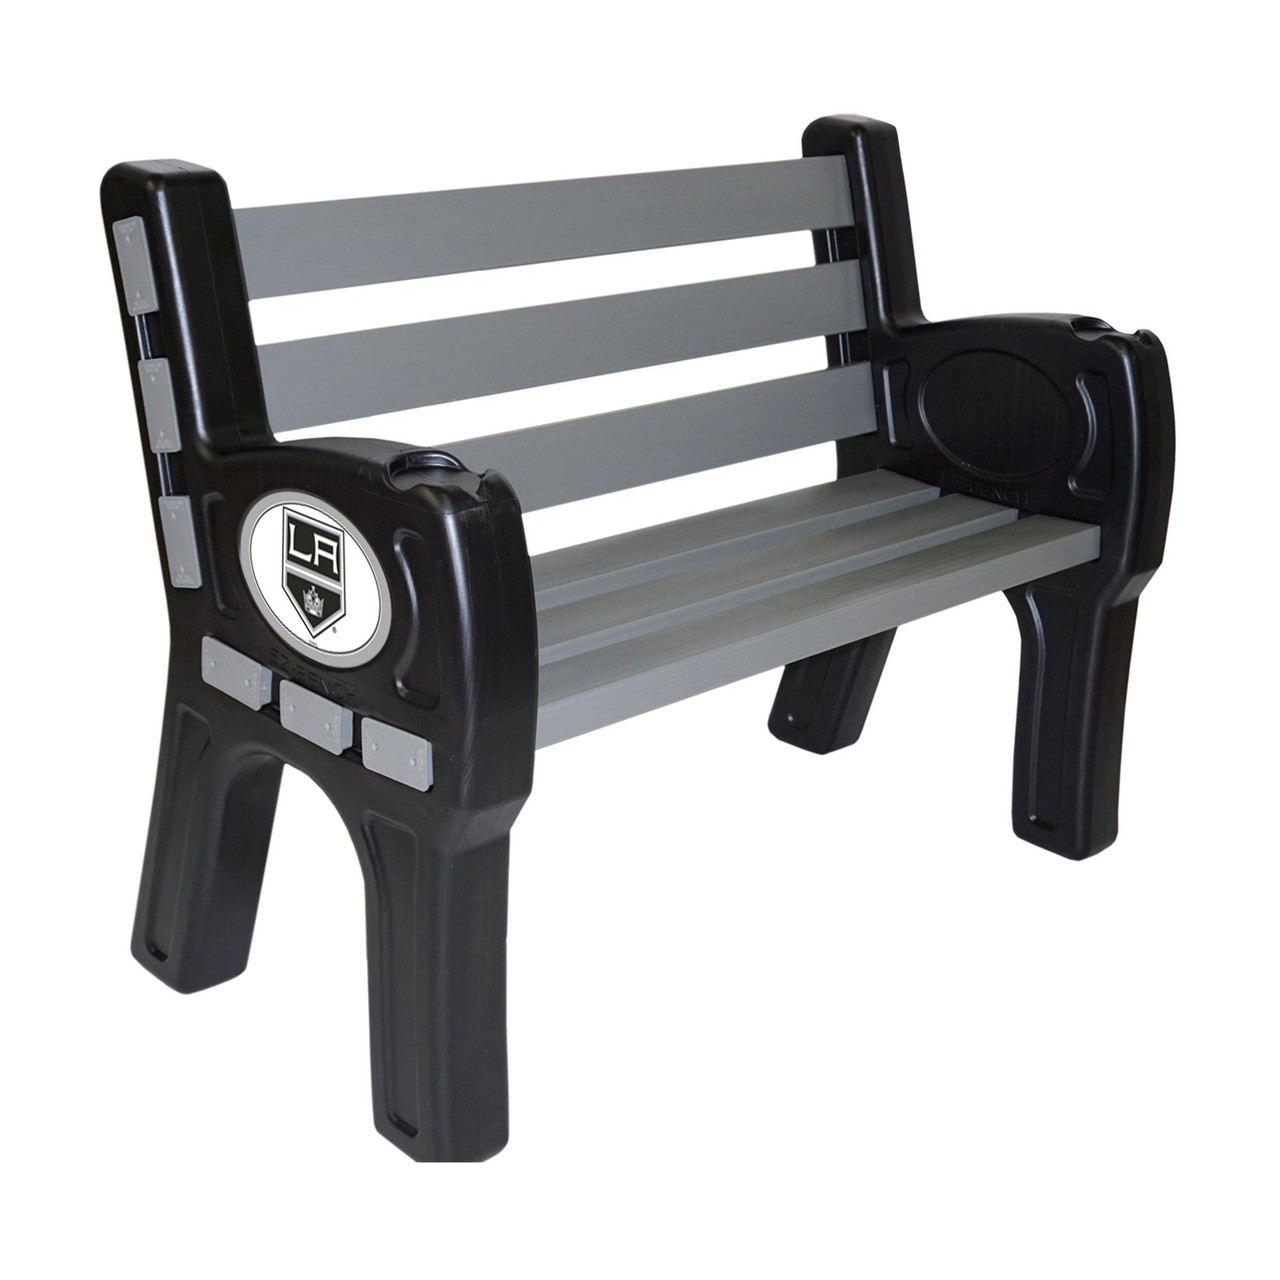 488-4022, 4', 48-in, Los Angeles. LA, Kings, Park, Bench, FREE SHIPPING, NHL, Imperial